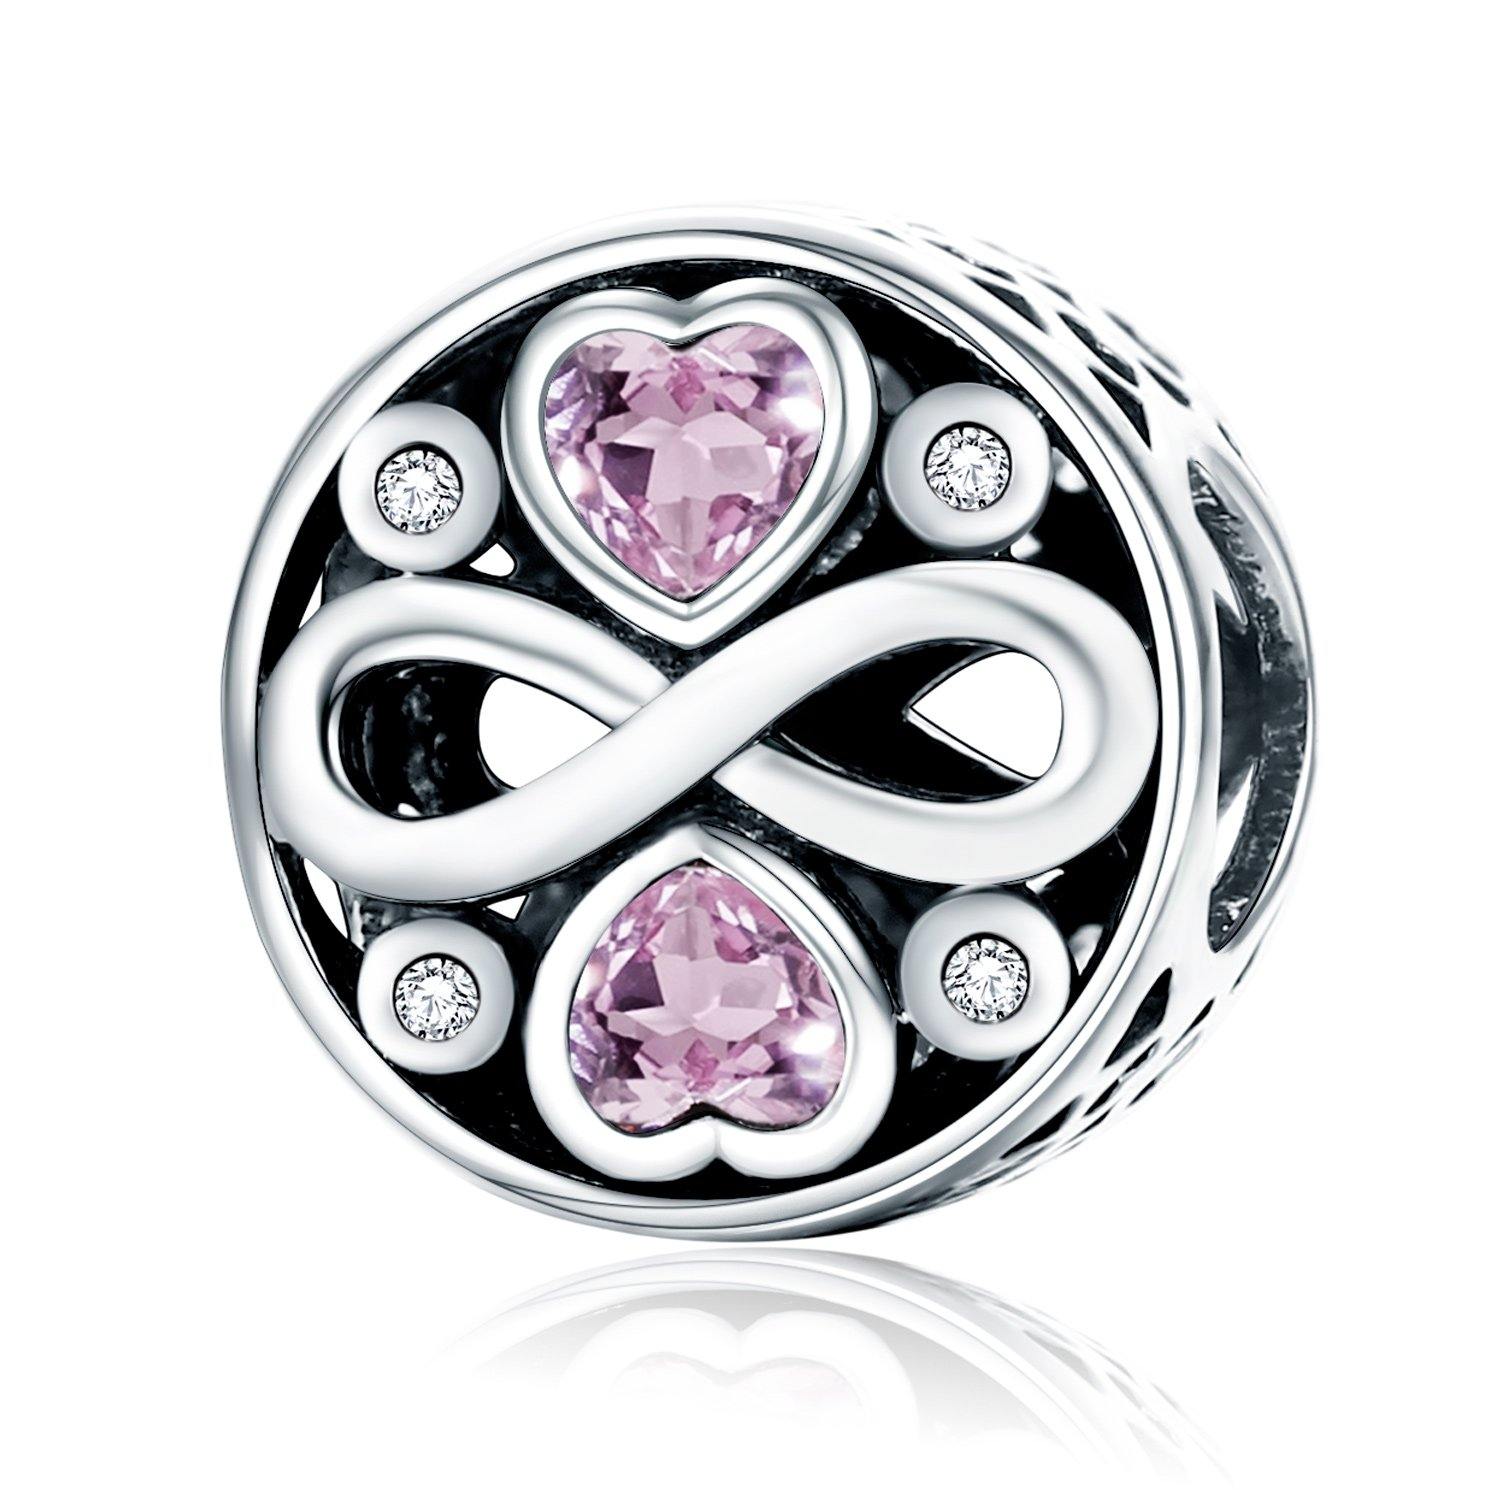 My Endless Love 925 Sterling Silver Charm - Aisllin Jewelry